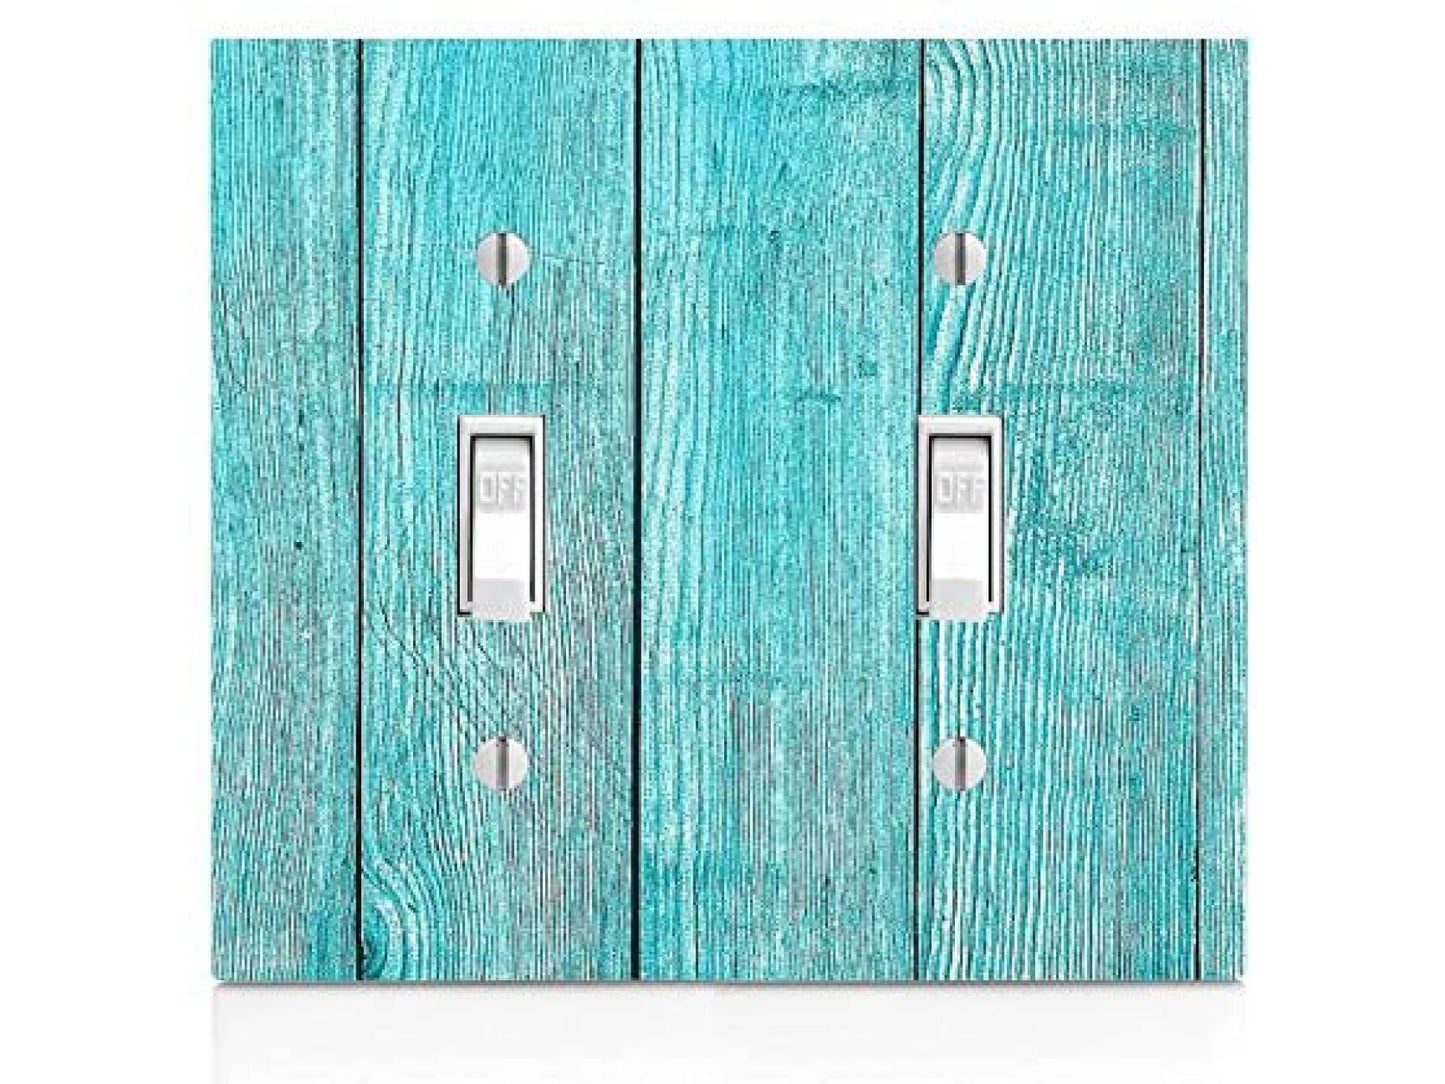 Blue Beach Wood, Plastic Double Gang Toggle Light Switch Wall Plate, 4.75 x 4.75 inches